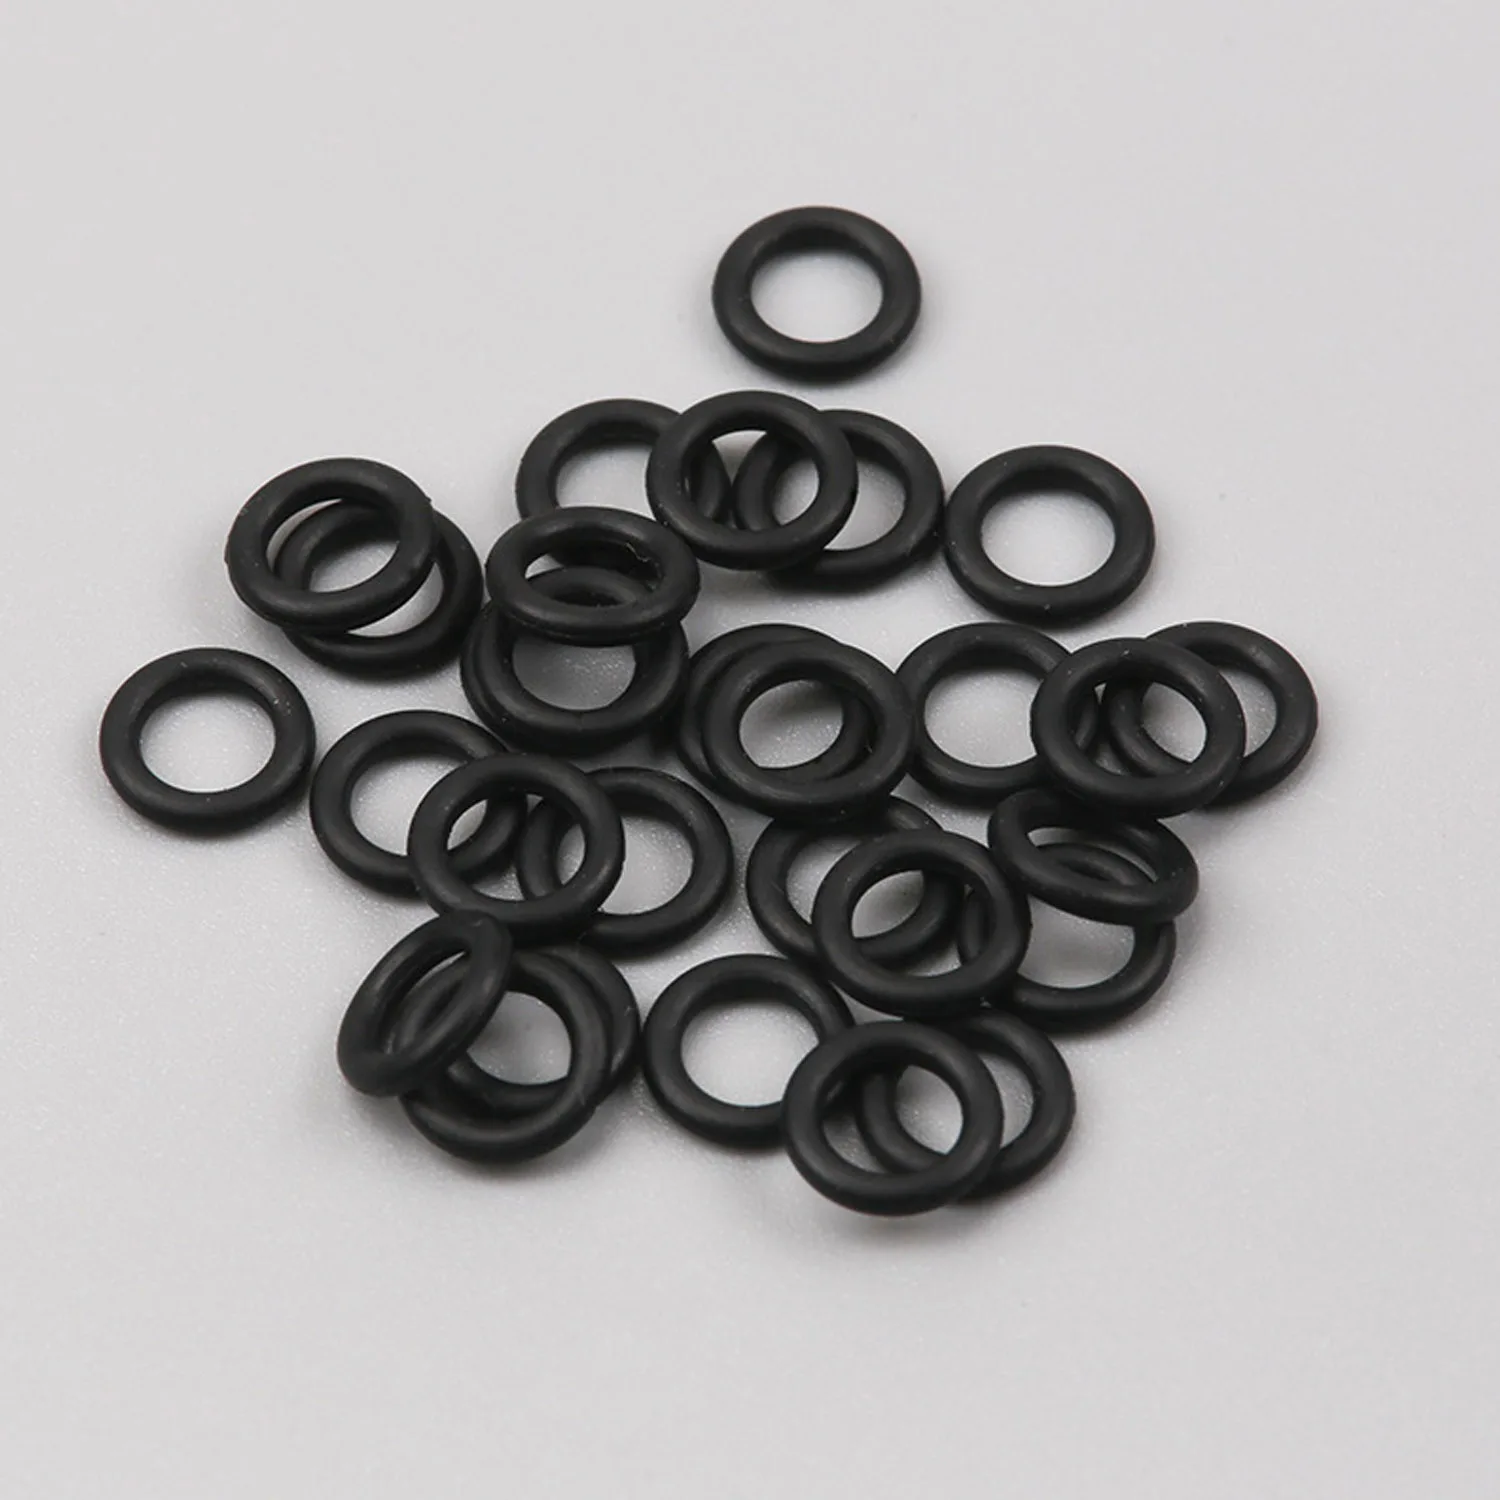 Elisona 100PCS Slicone Rubber O-Ring Switch Noise Buffer Dampeners with Keycap Puller for Mechanical Keyboard